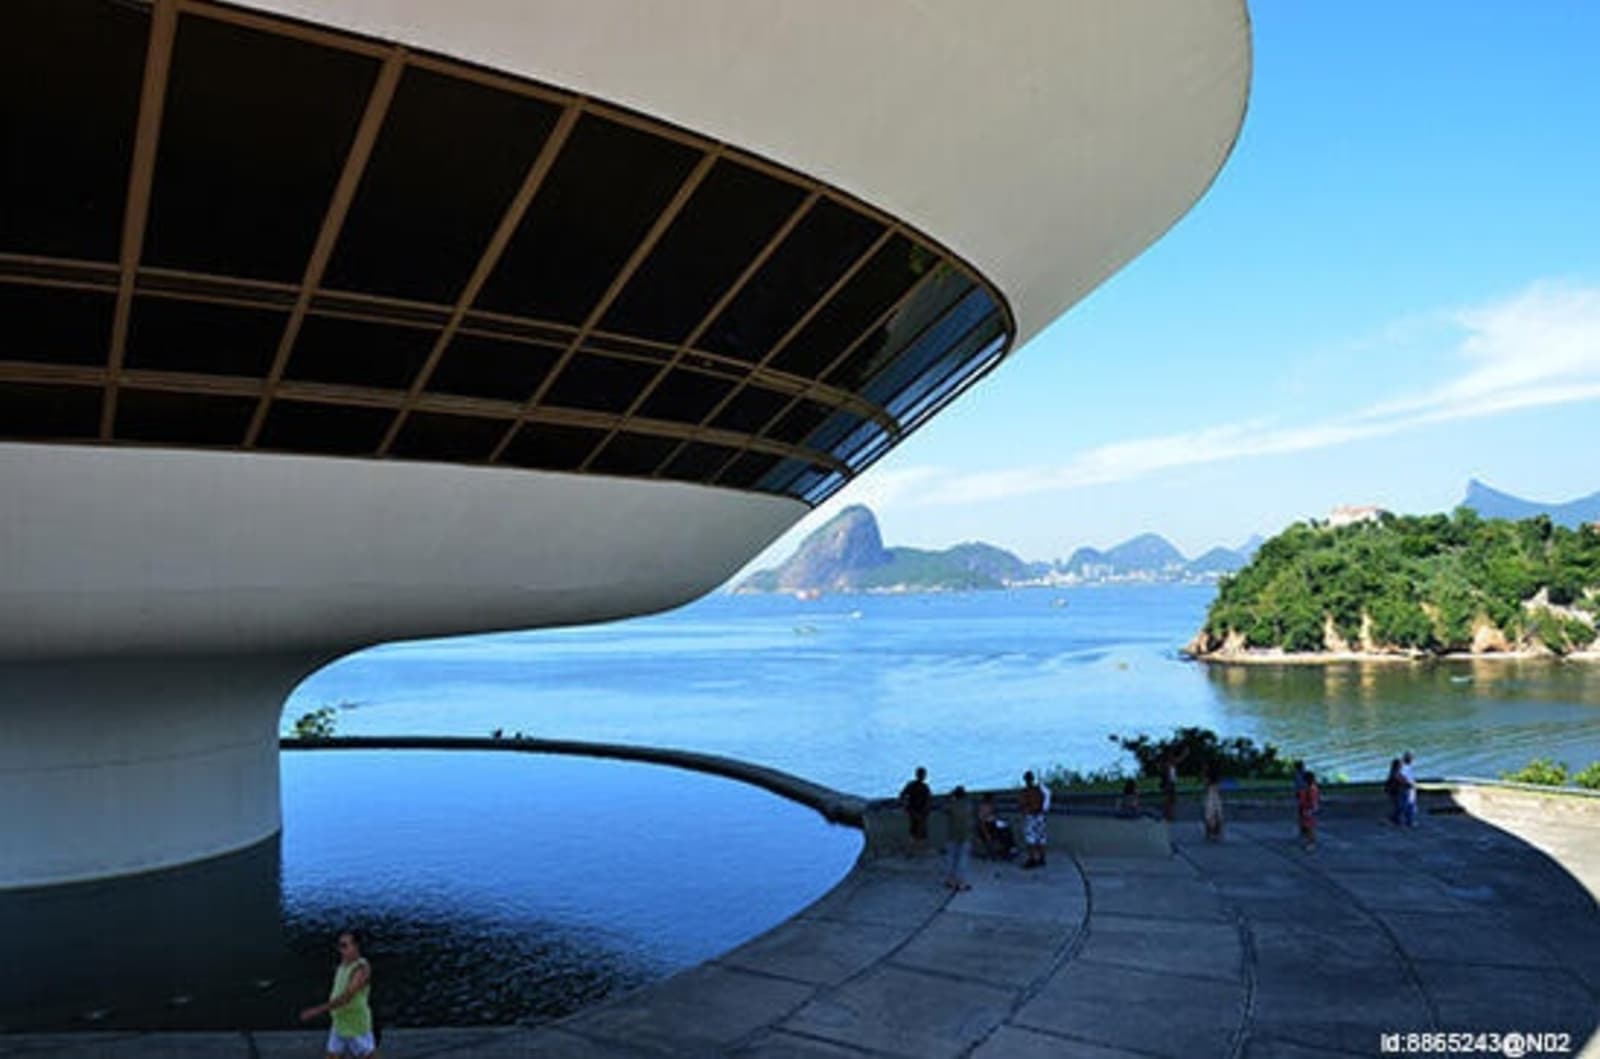 RS-Museum-of-Contemporary-Art-Brazil-flickr-id-8865243@N02.jpg